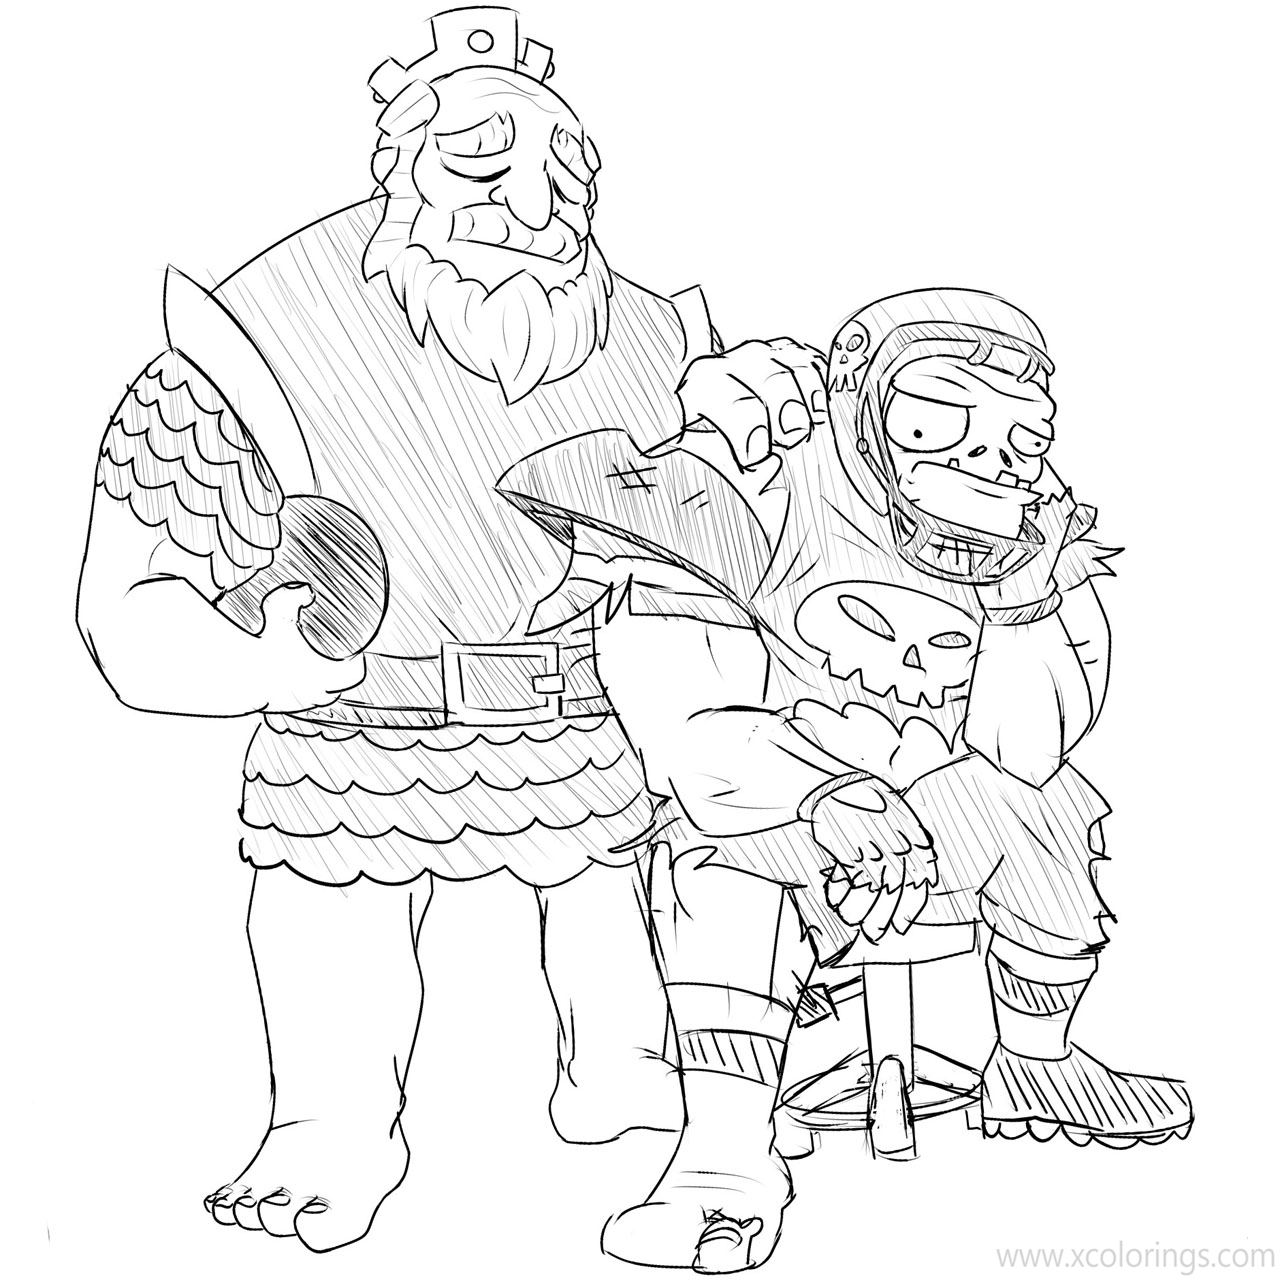 Free Clash Royale Coloring Pages Characters Sketch printable